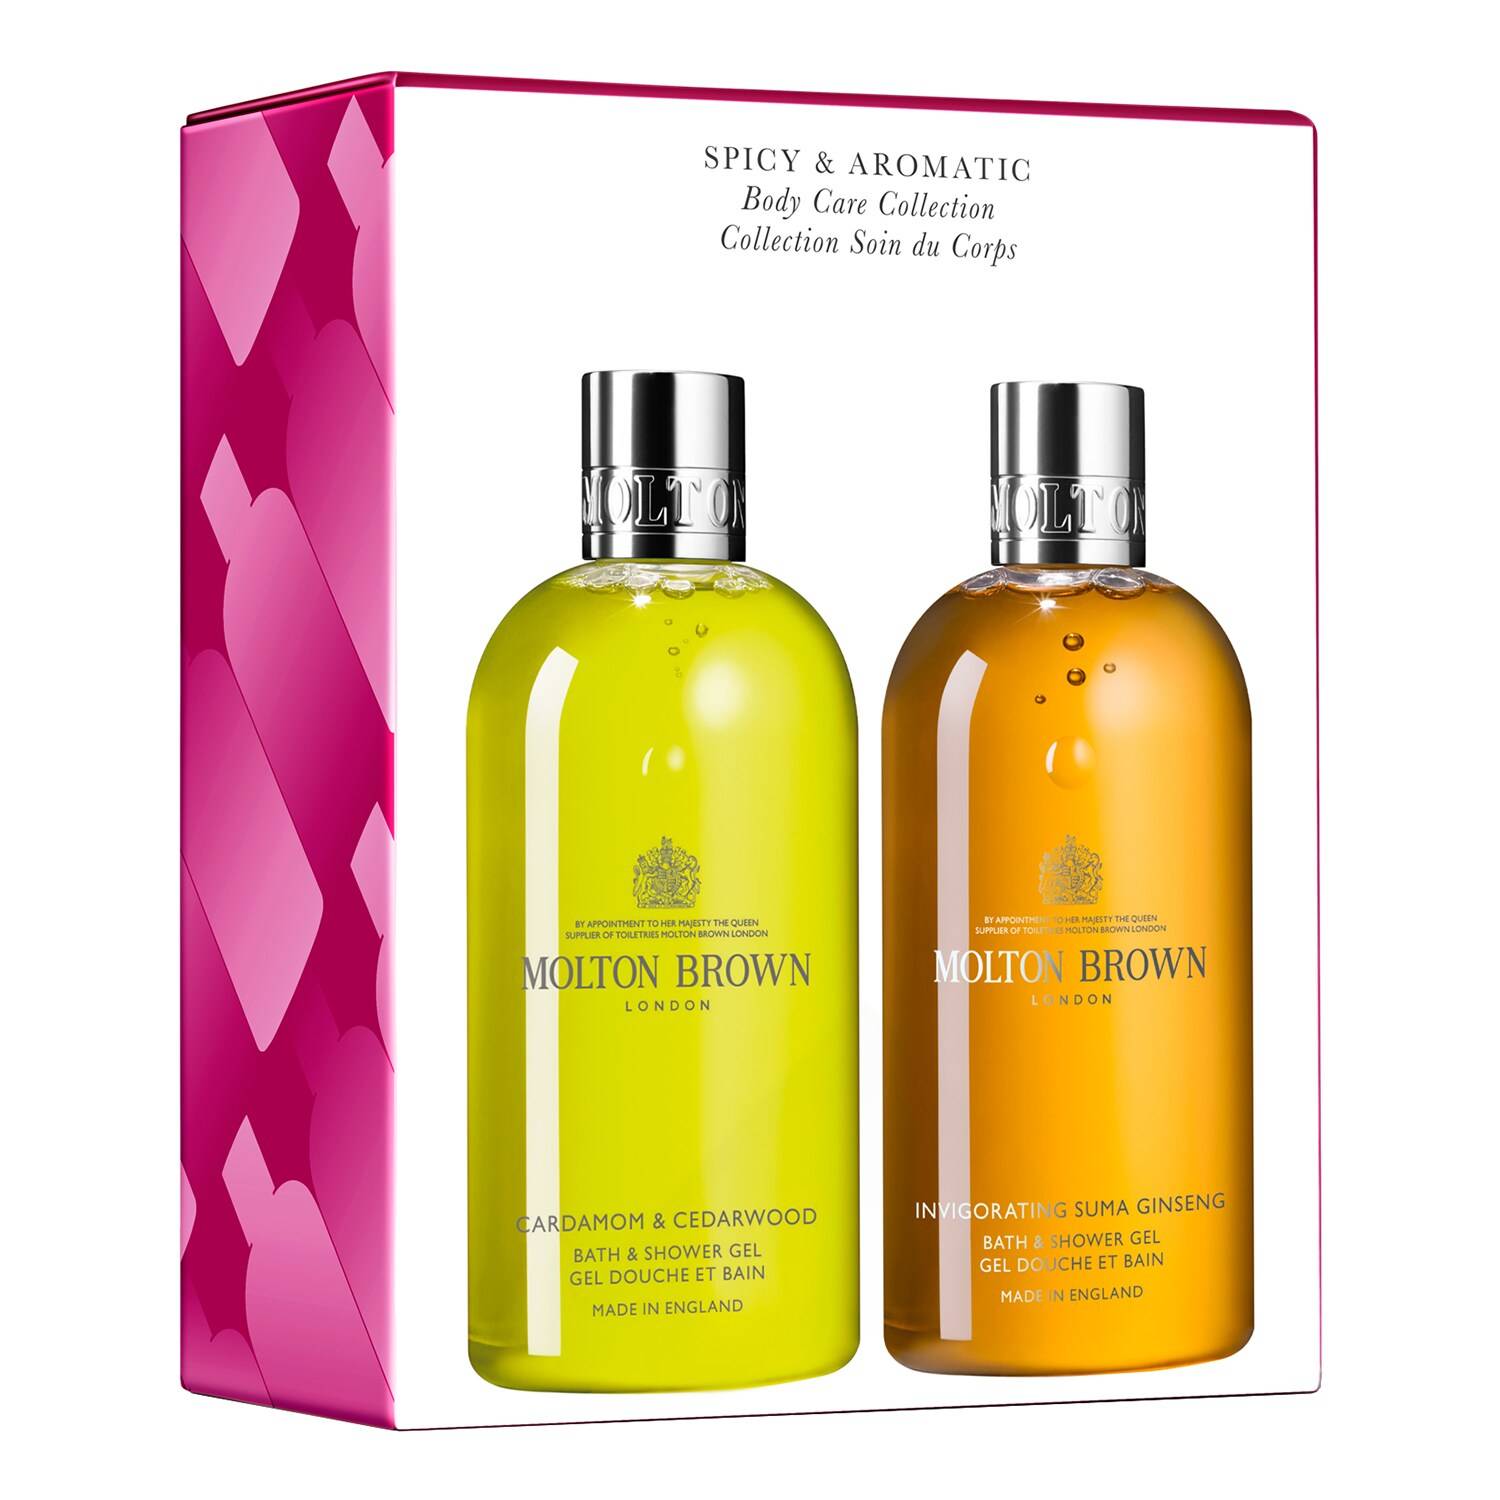 Molton Brown Spicy & Aromatic Body Care Gift Set